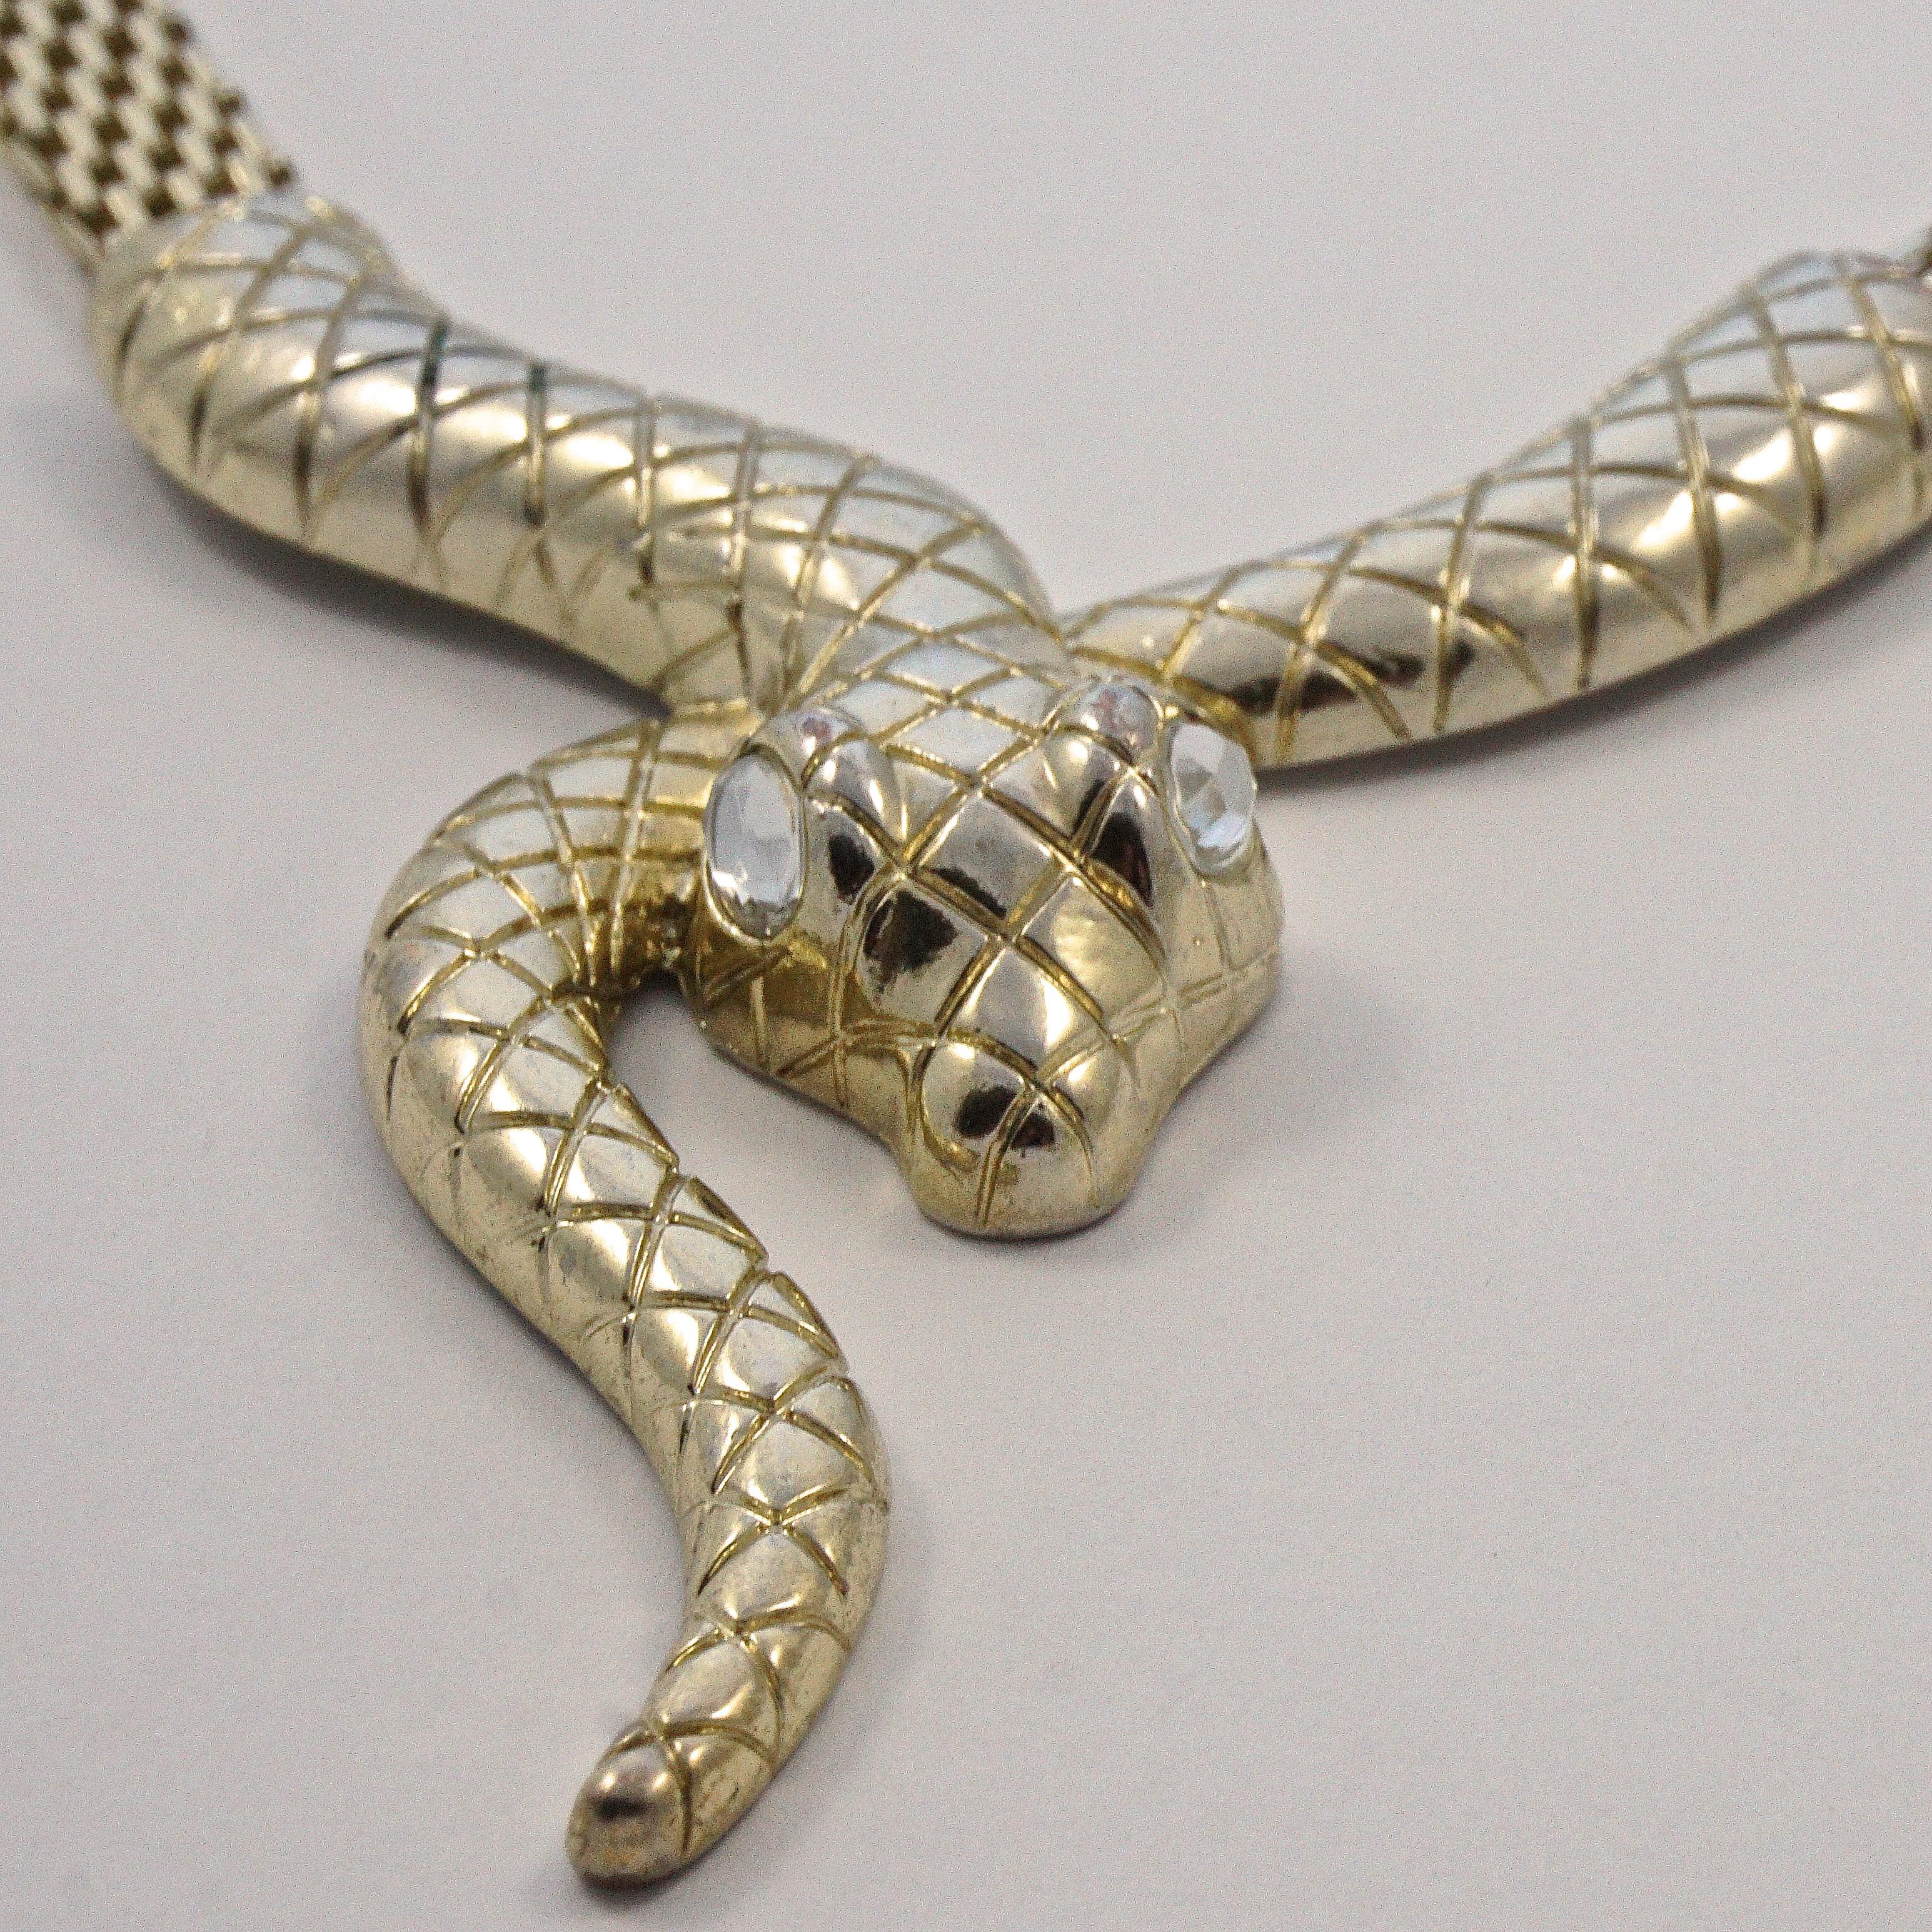 Gold Plated Mesh Link Snake Necklace with Clear Rhinestone Eyes circa 1980s 1